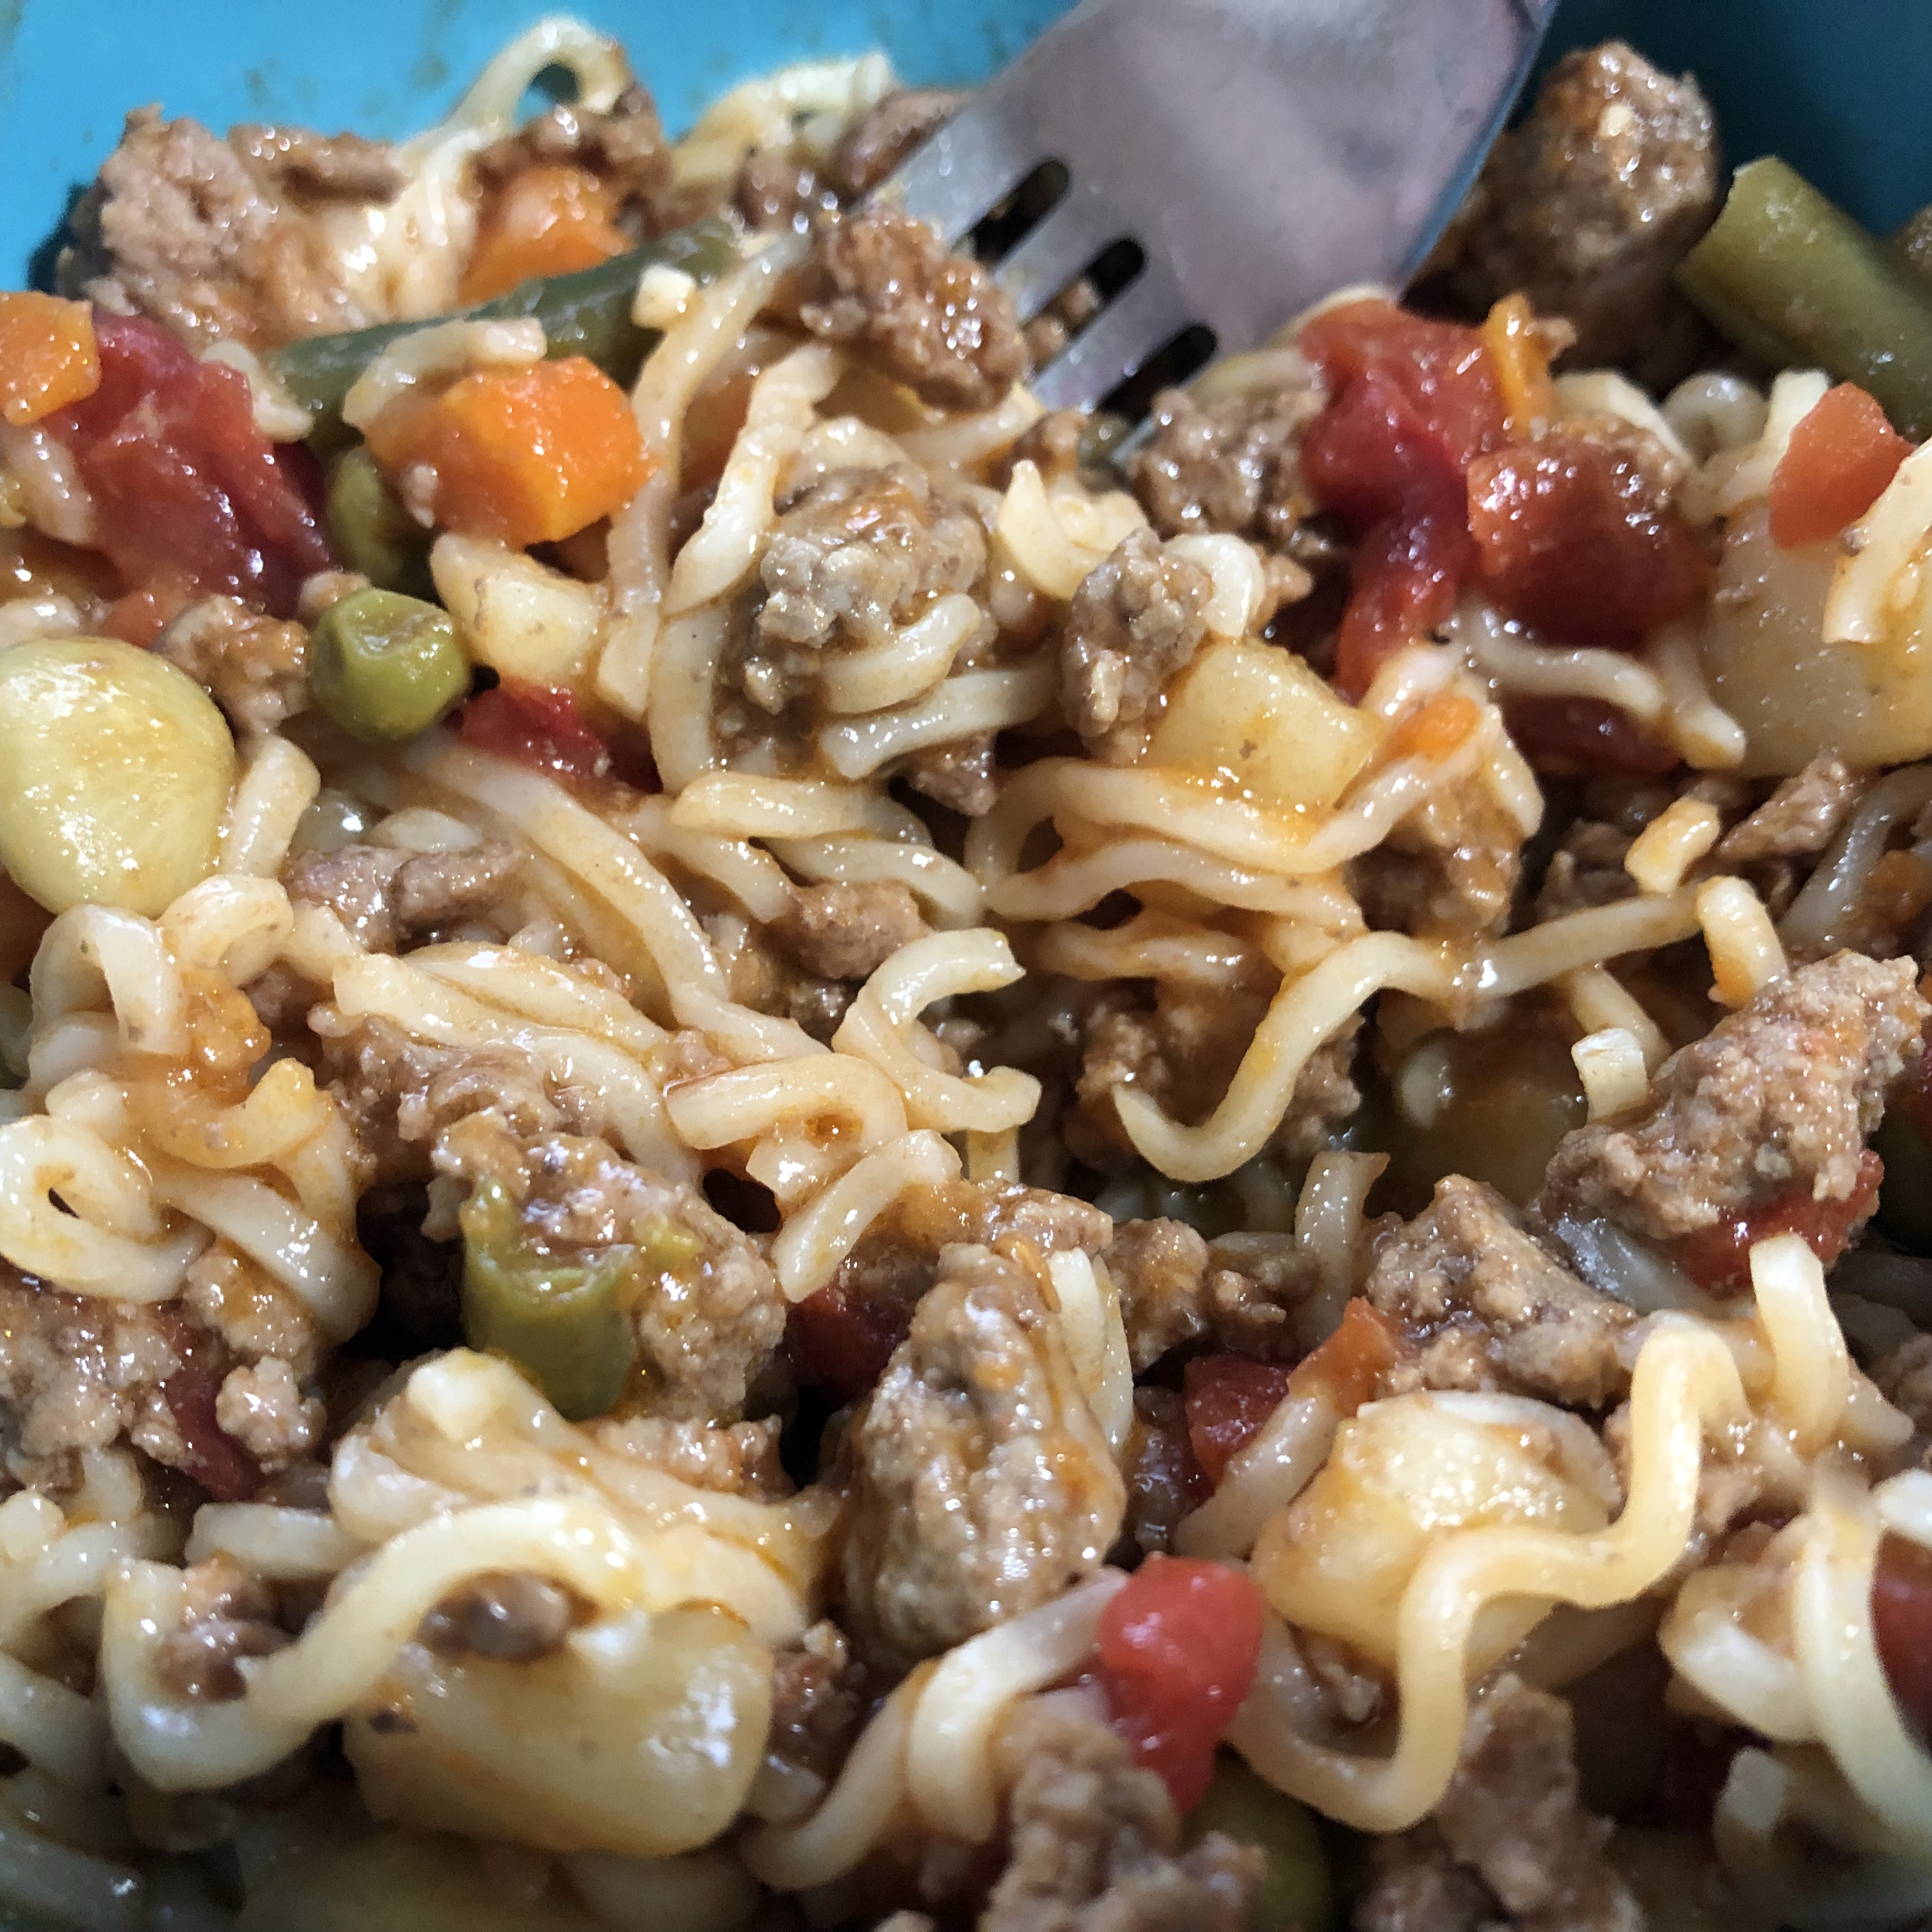 Ground Beef Curly Noodle